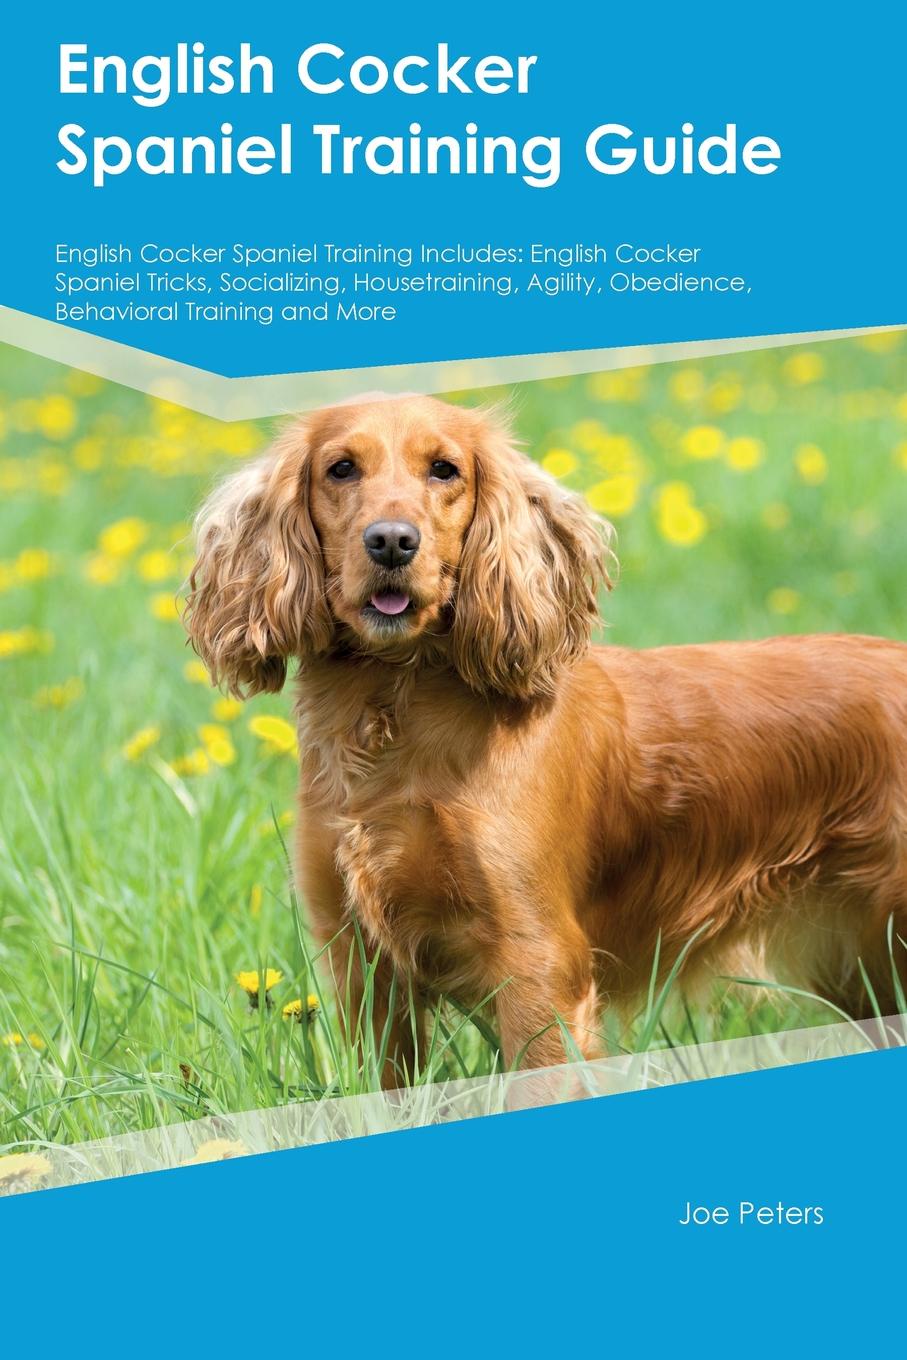 English Cocker Spaniel Training Guide English Cocker Spaniel Training Includes. English Cocker Spaniel Tricks, Socializing, Housetraining, Agility, Obedience, Behavioral Training and More